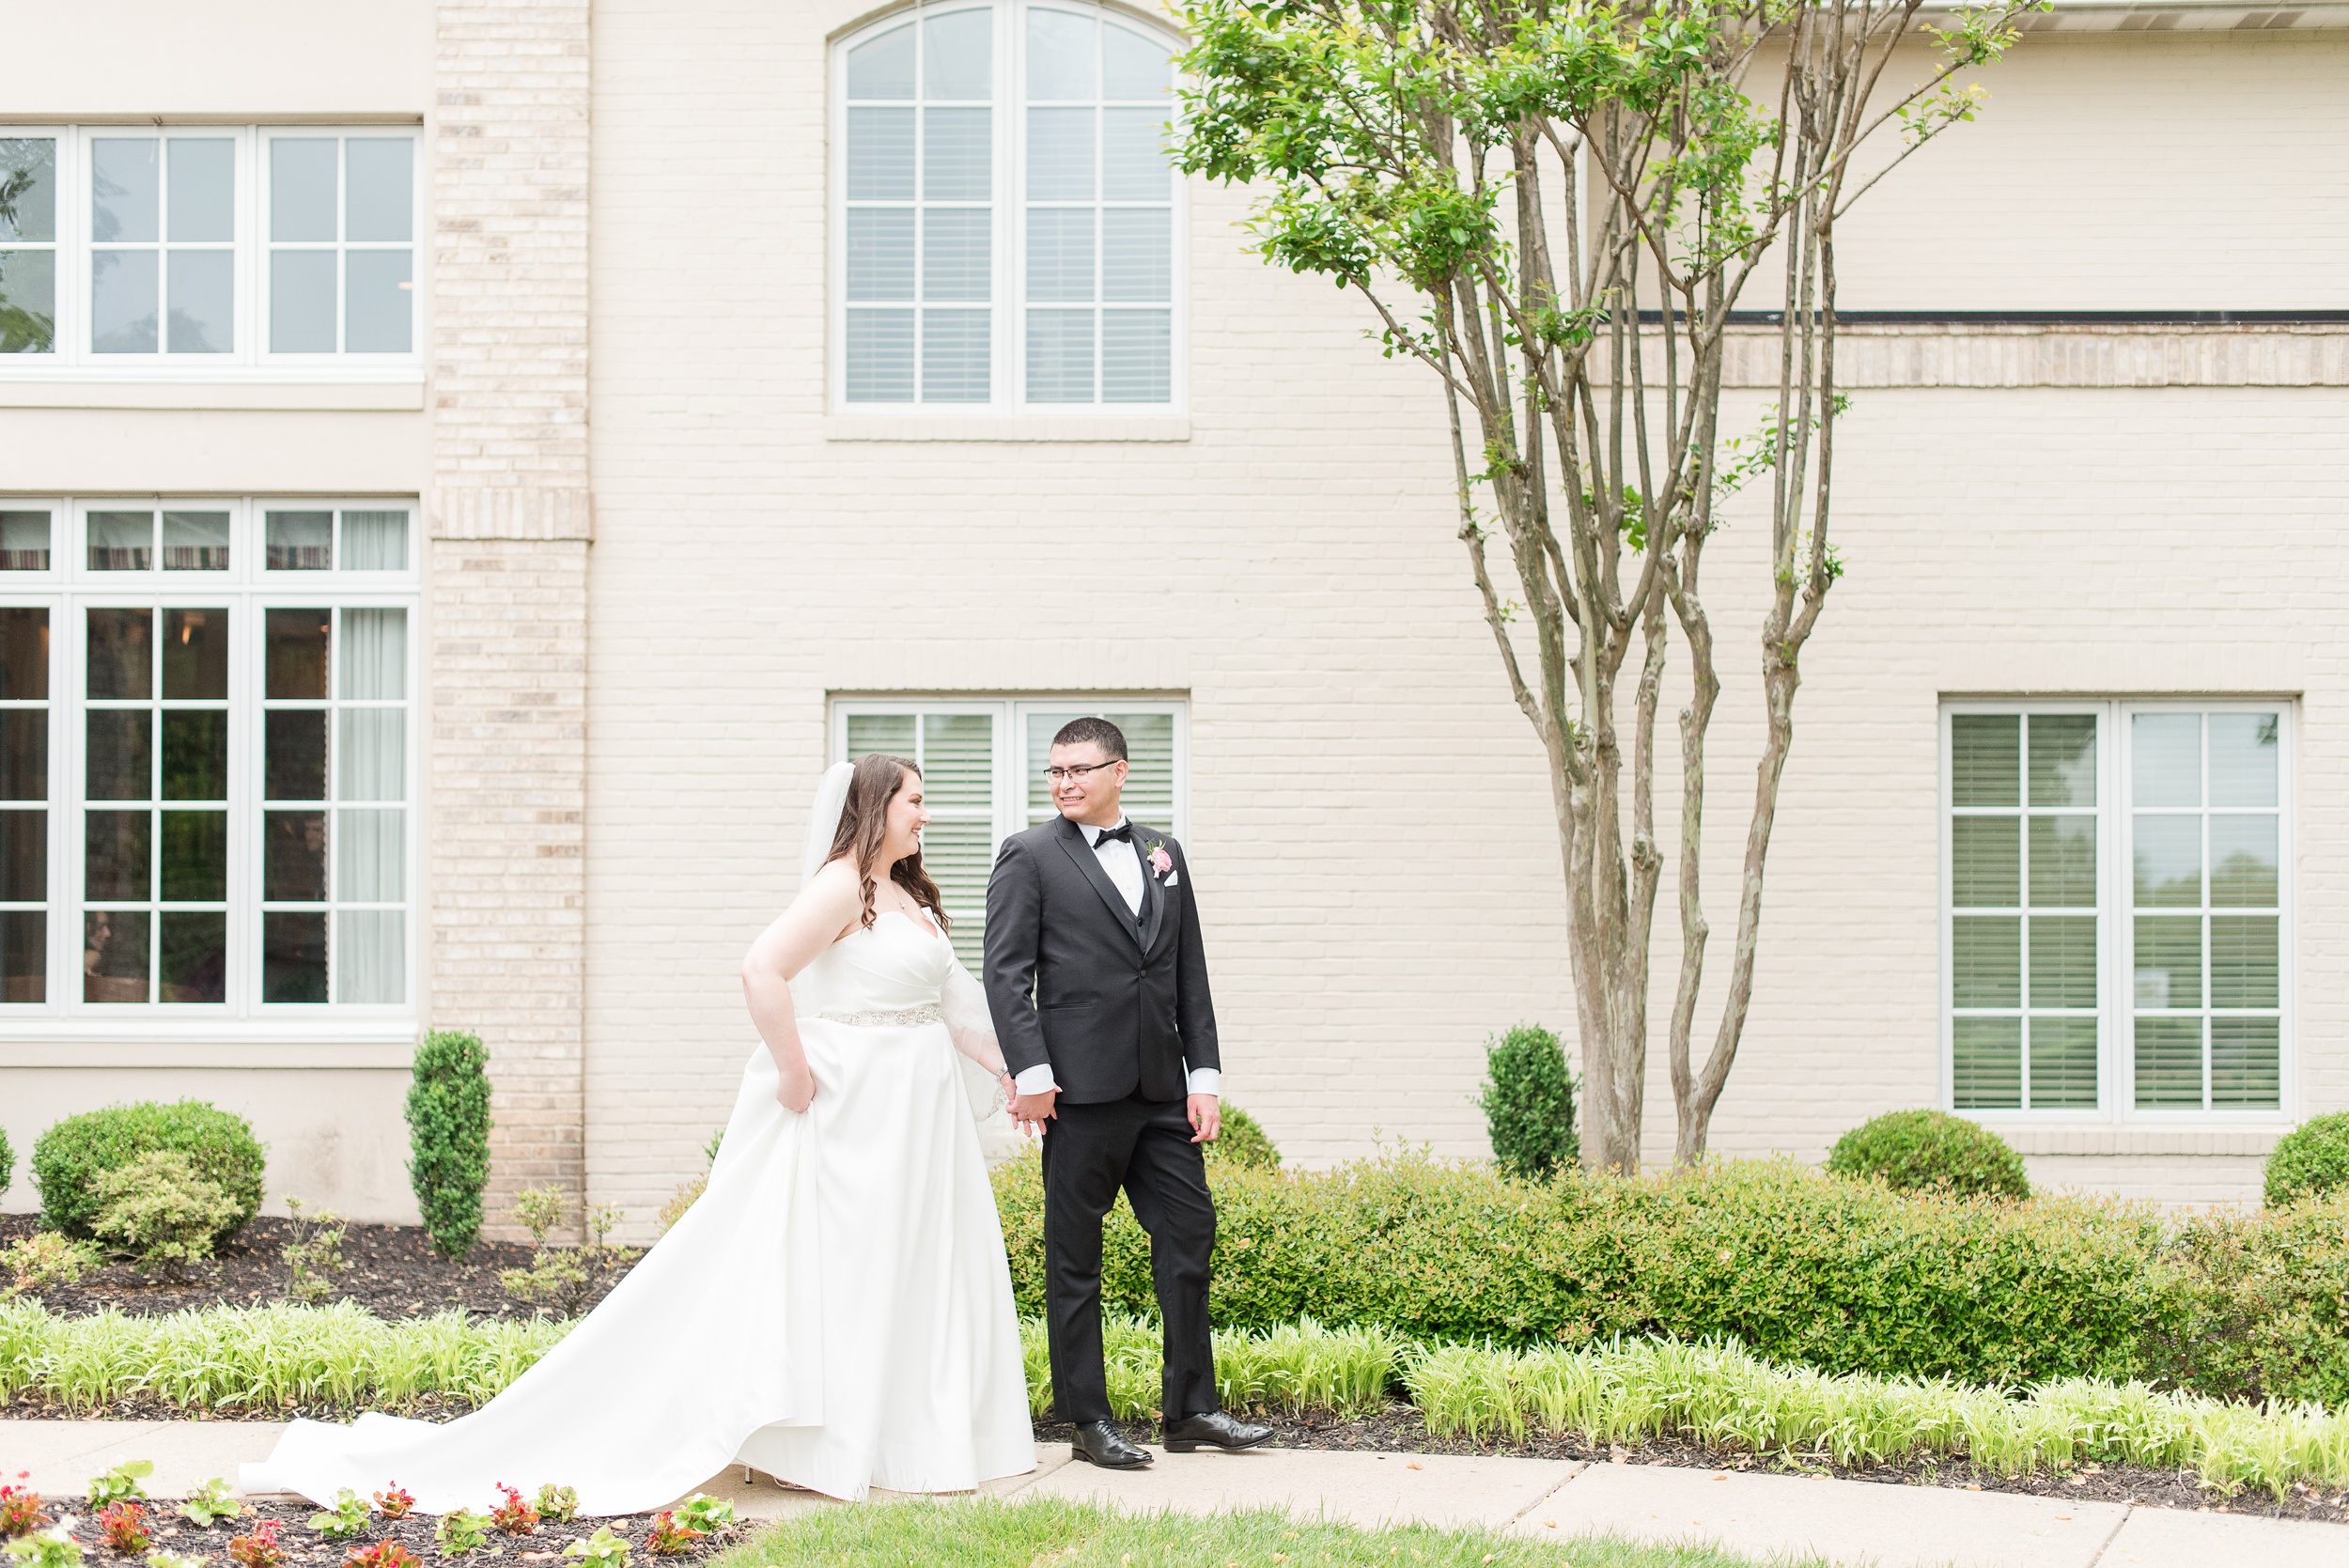 Newlyweds giggle while walking down the sidewalk and holding hands